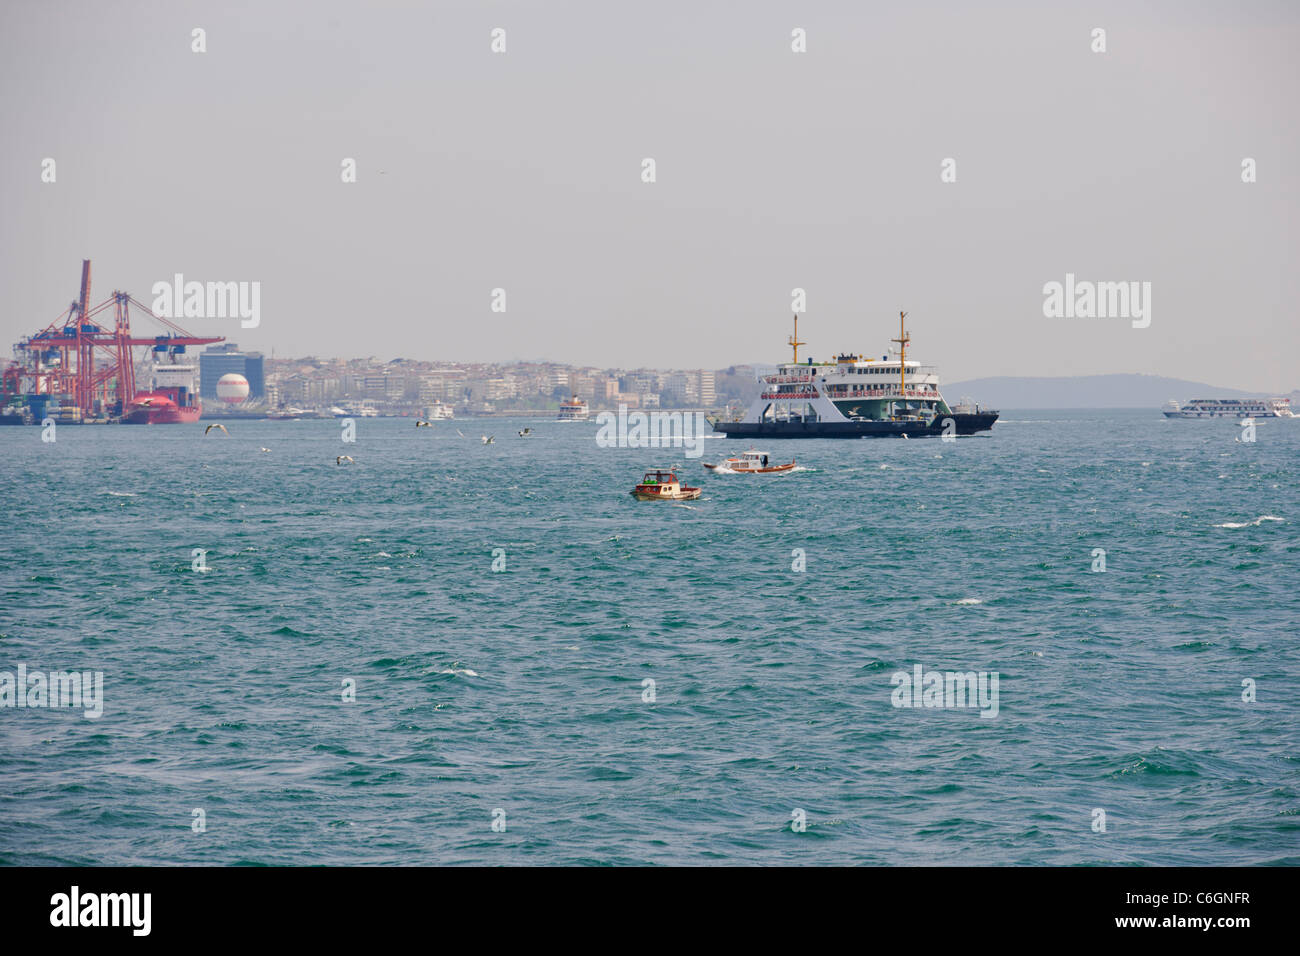 The Port of Istanbul's Container terminals,Entrance to Bosphorus,Istanbul,Golden Horn,Sea of Marmara, Constantinople,Turkey Stock Photo